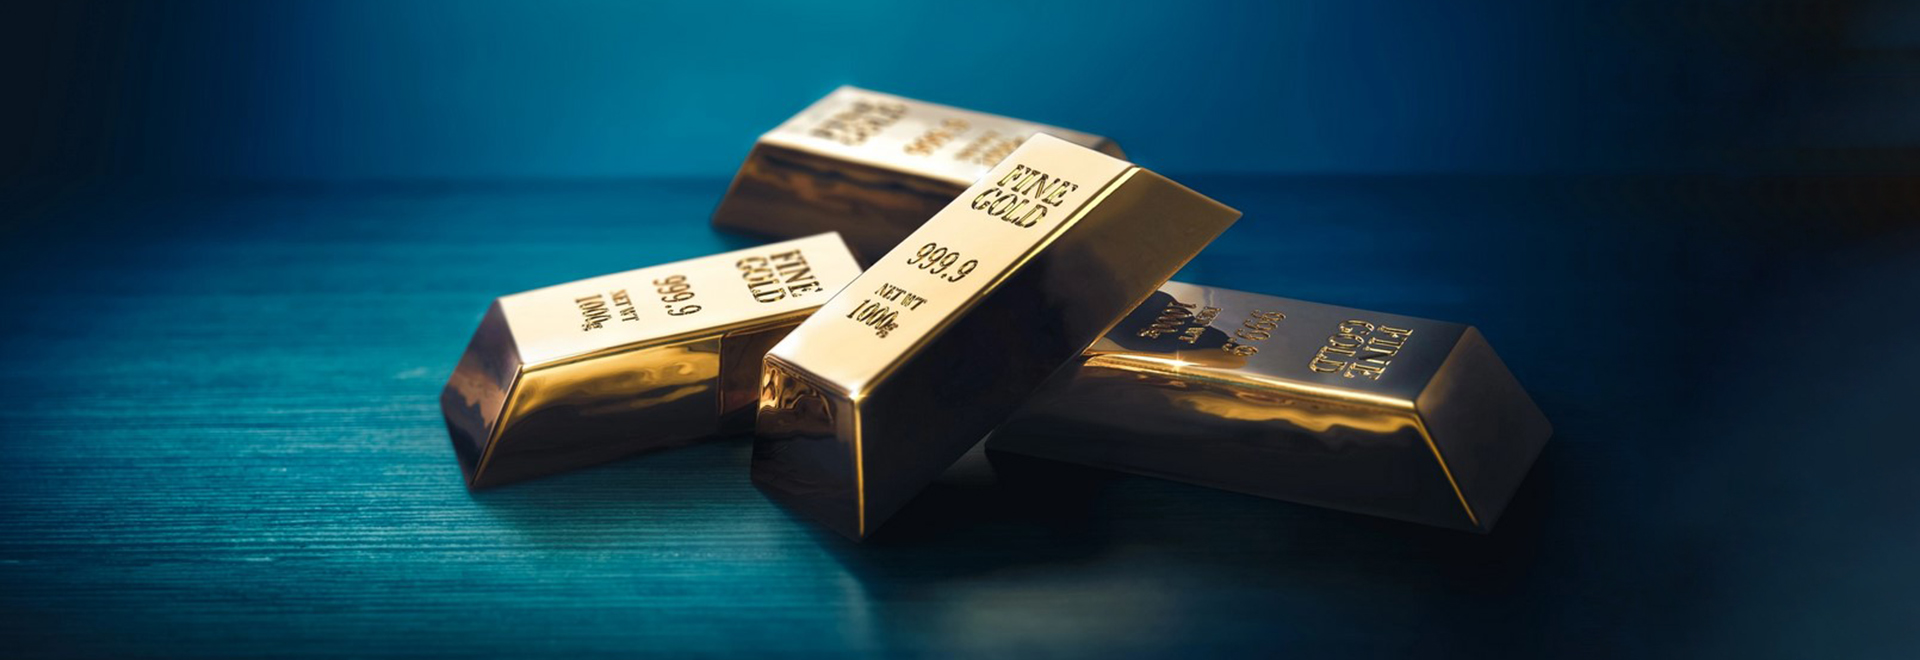 Gold Remains An Asset Of Interest And Influence